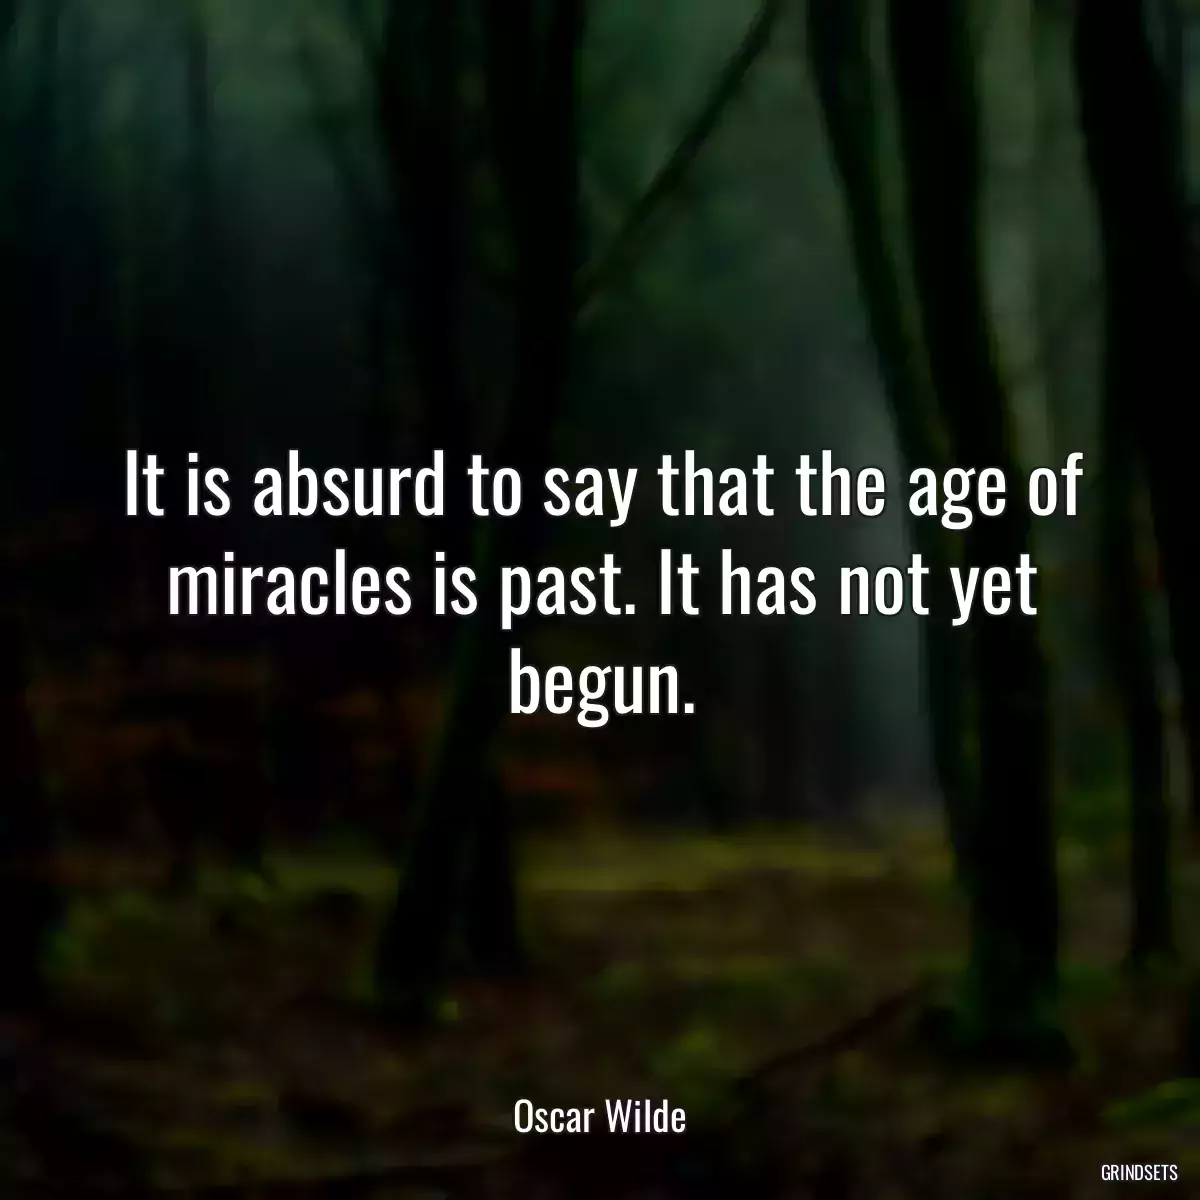 It is absurd to say that the age of miracles is past. It has not yet begun.